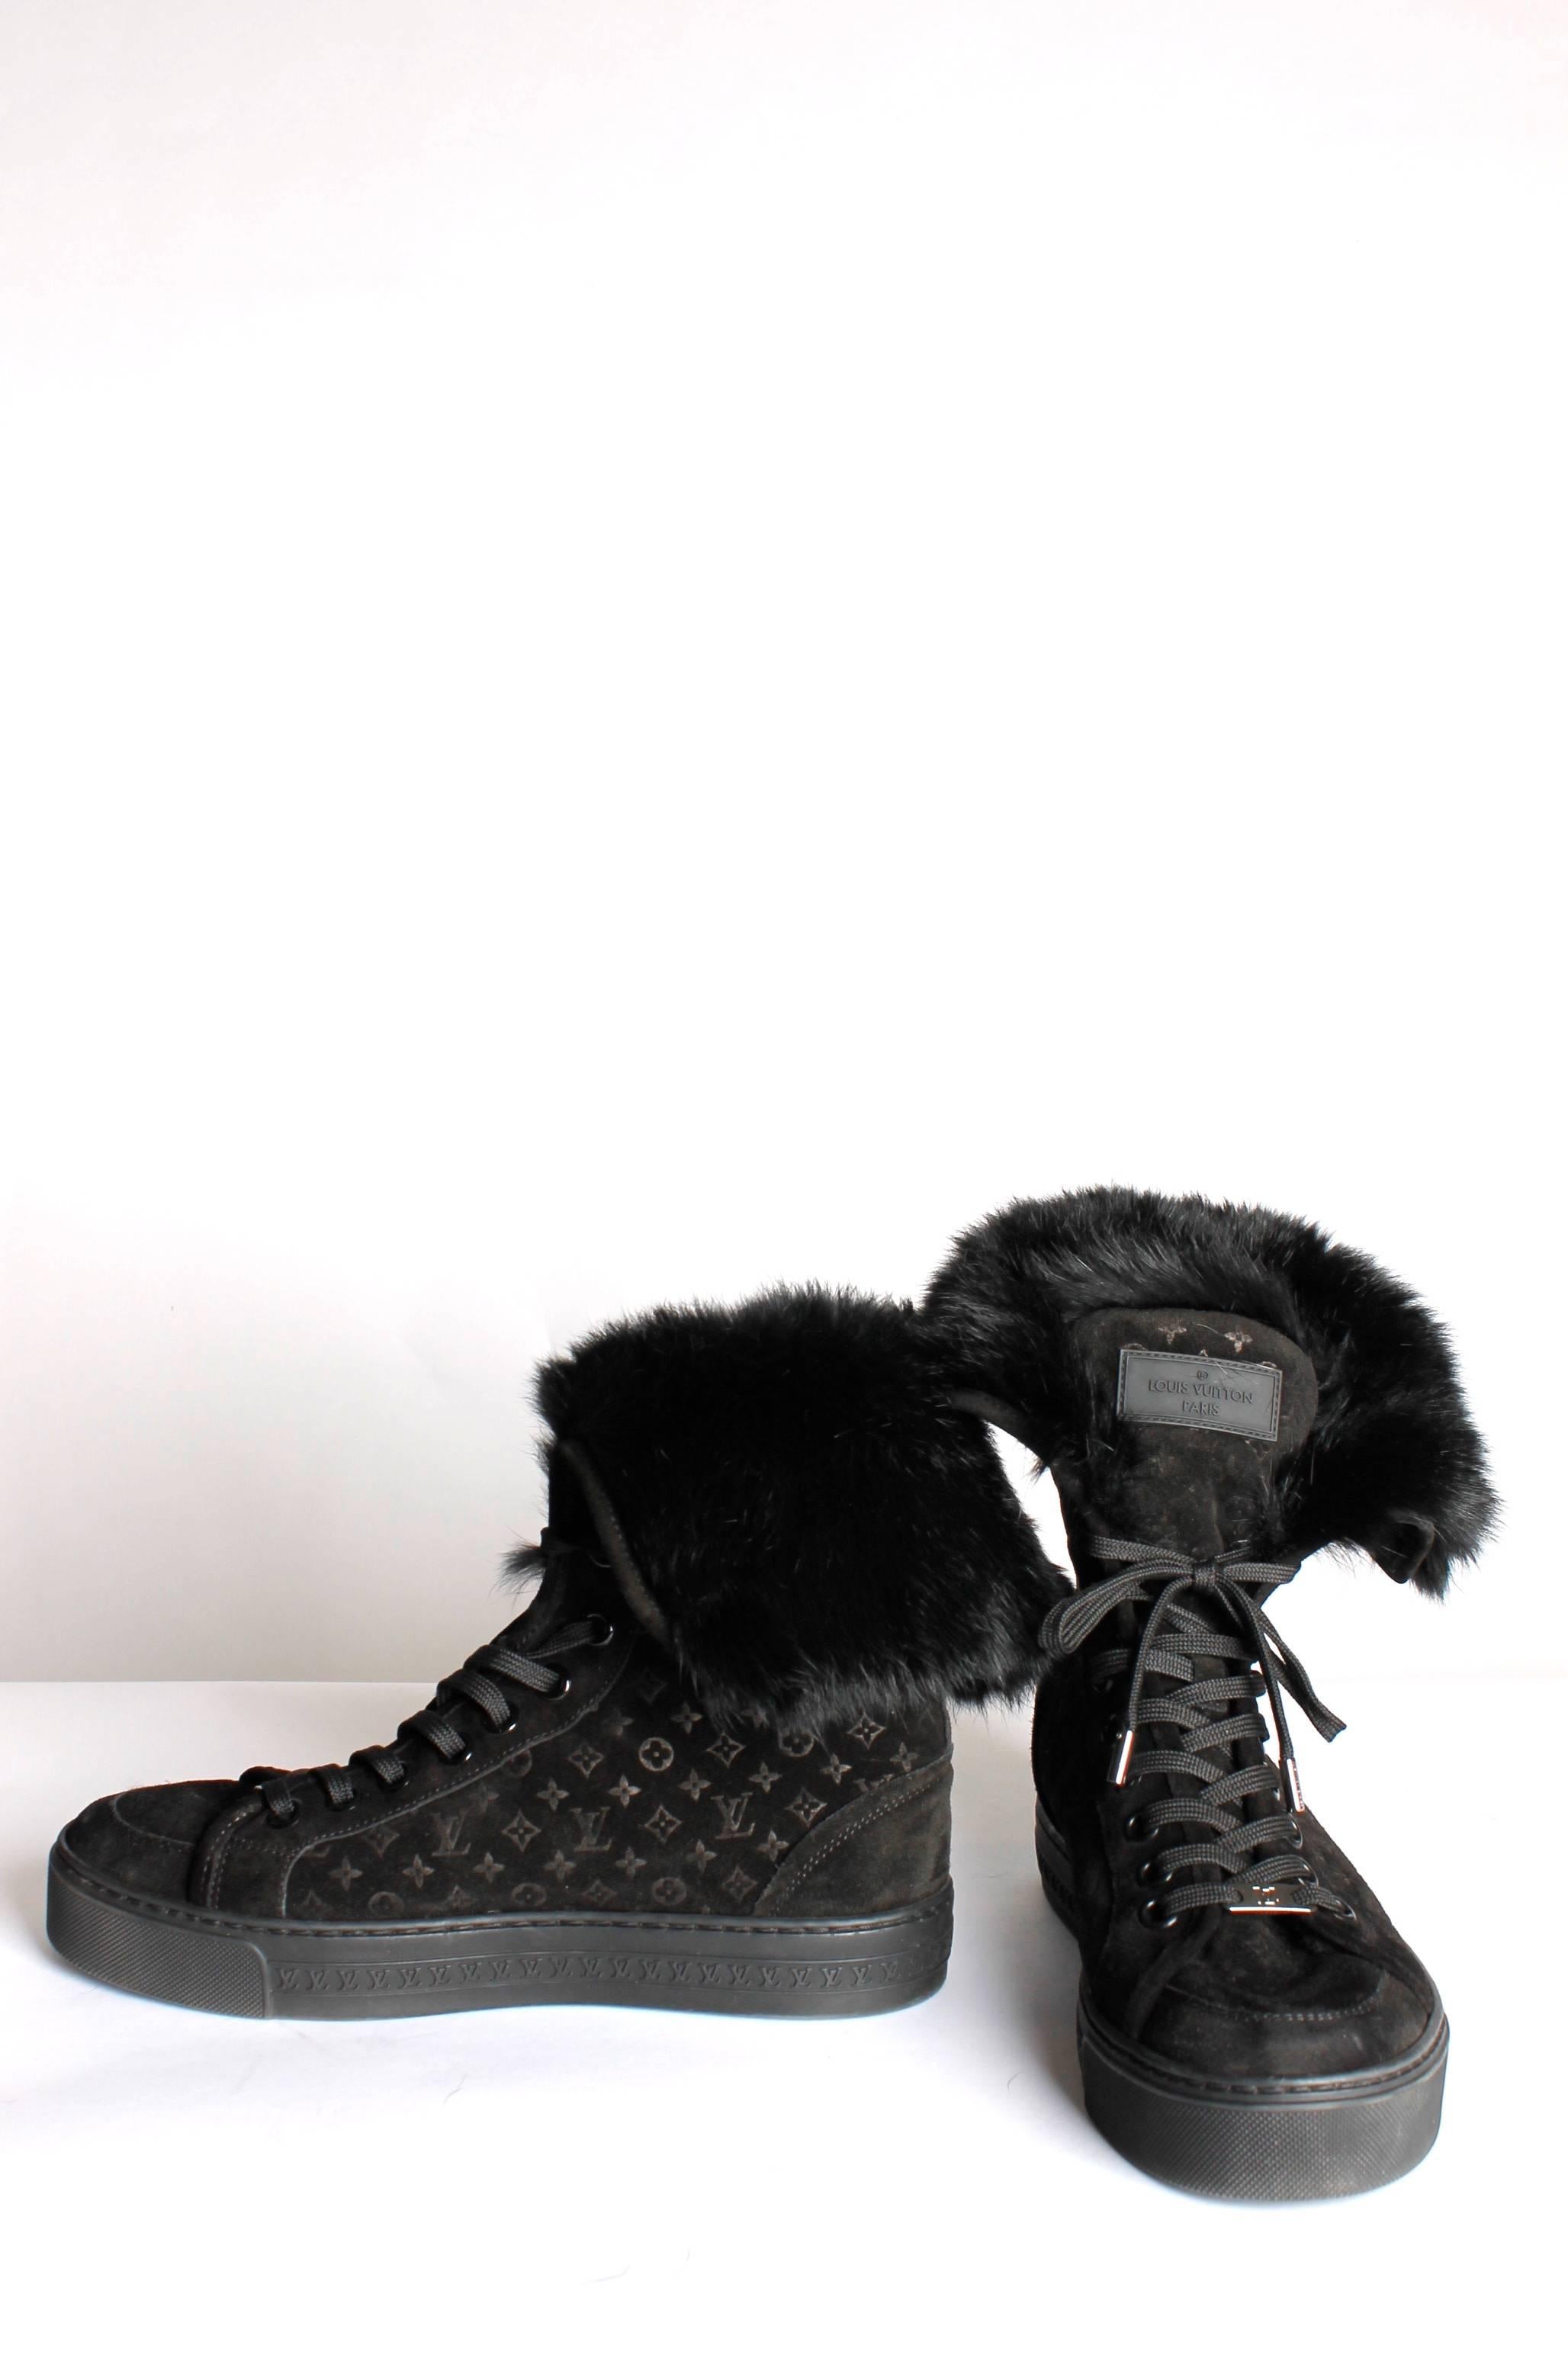 Louis Vuitton made these awesome sneakers; black suede covered with embossed monograms and a large trim of rabbit fur to finish it of.

A thick sole, in the middle a LV-logo trim. The shaft and tongue of the shoe are lined with rabbit fur, the